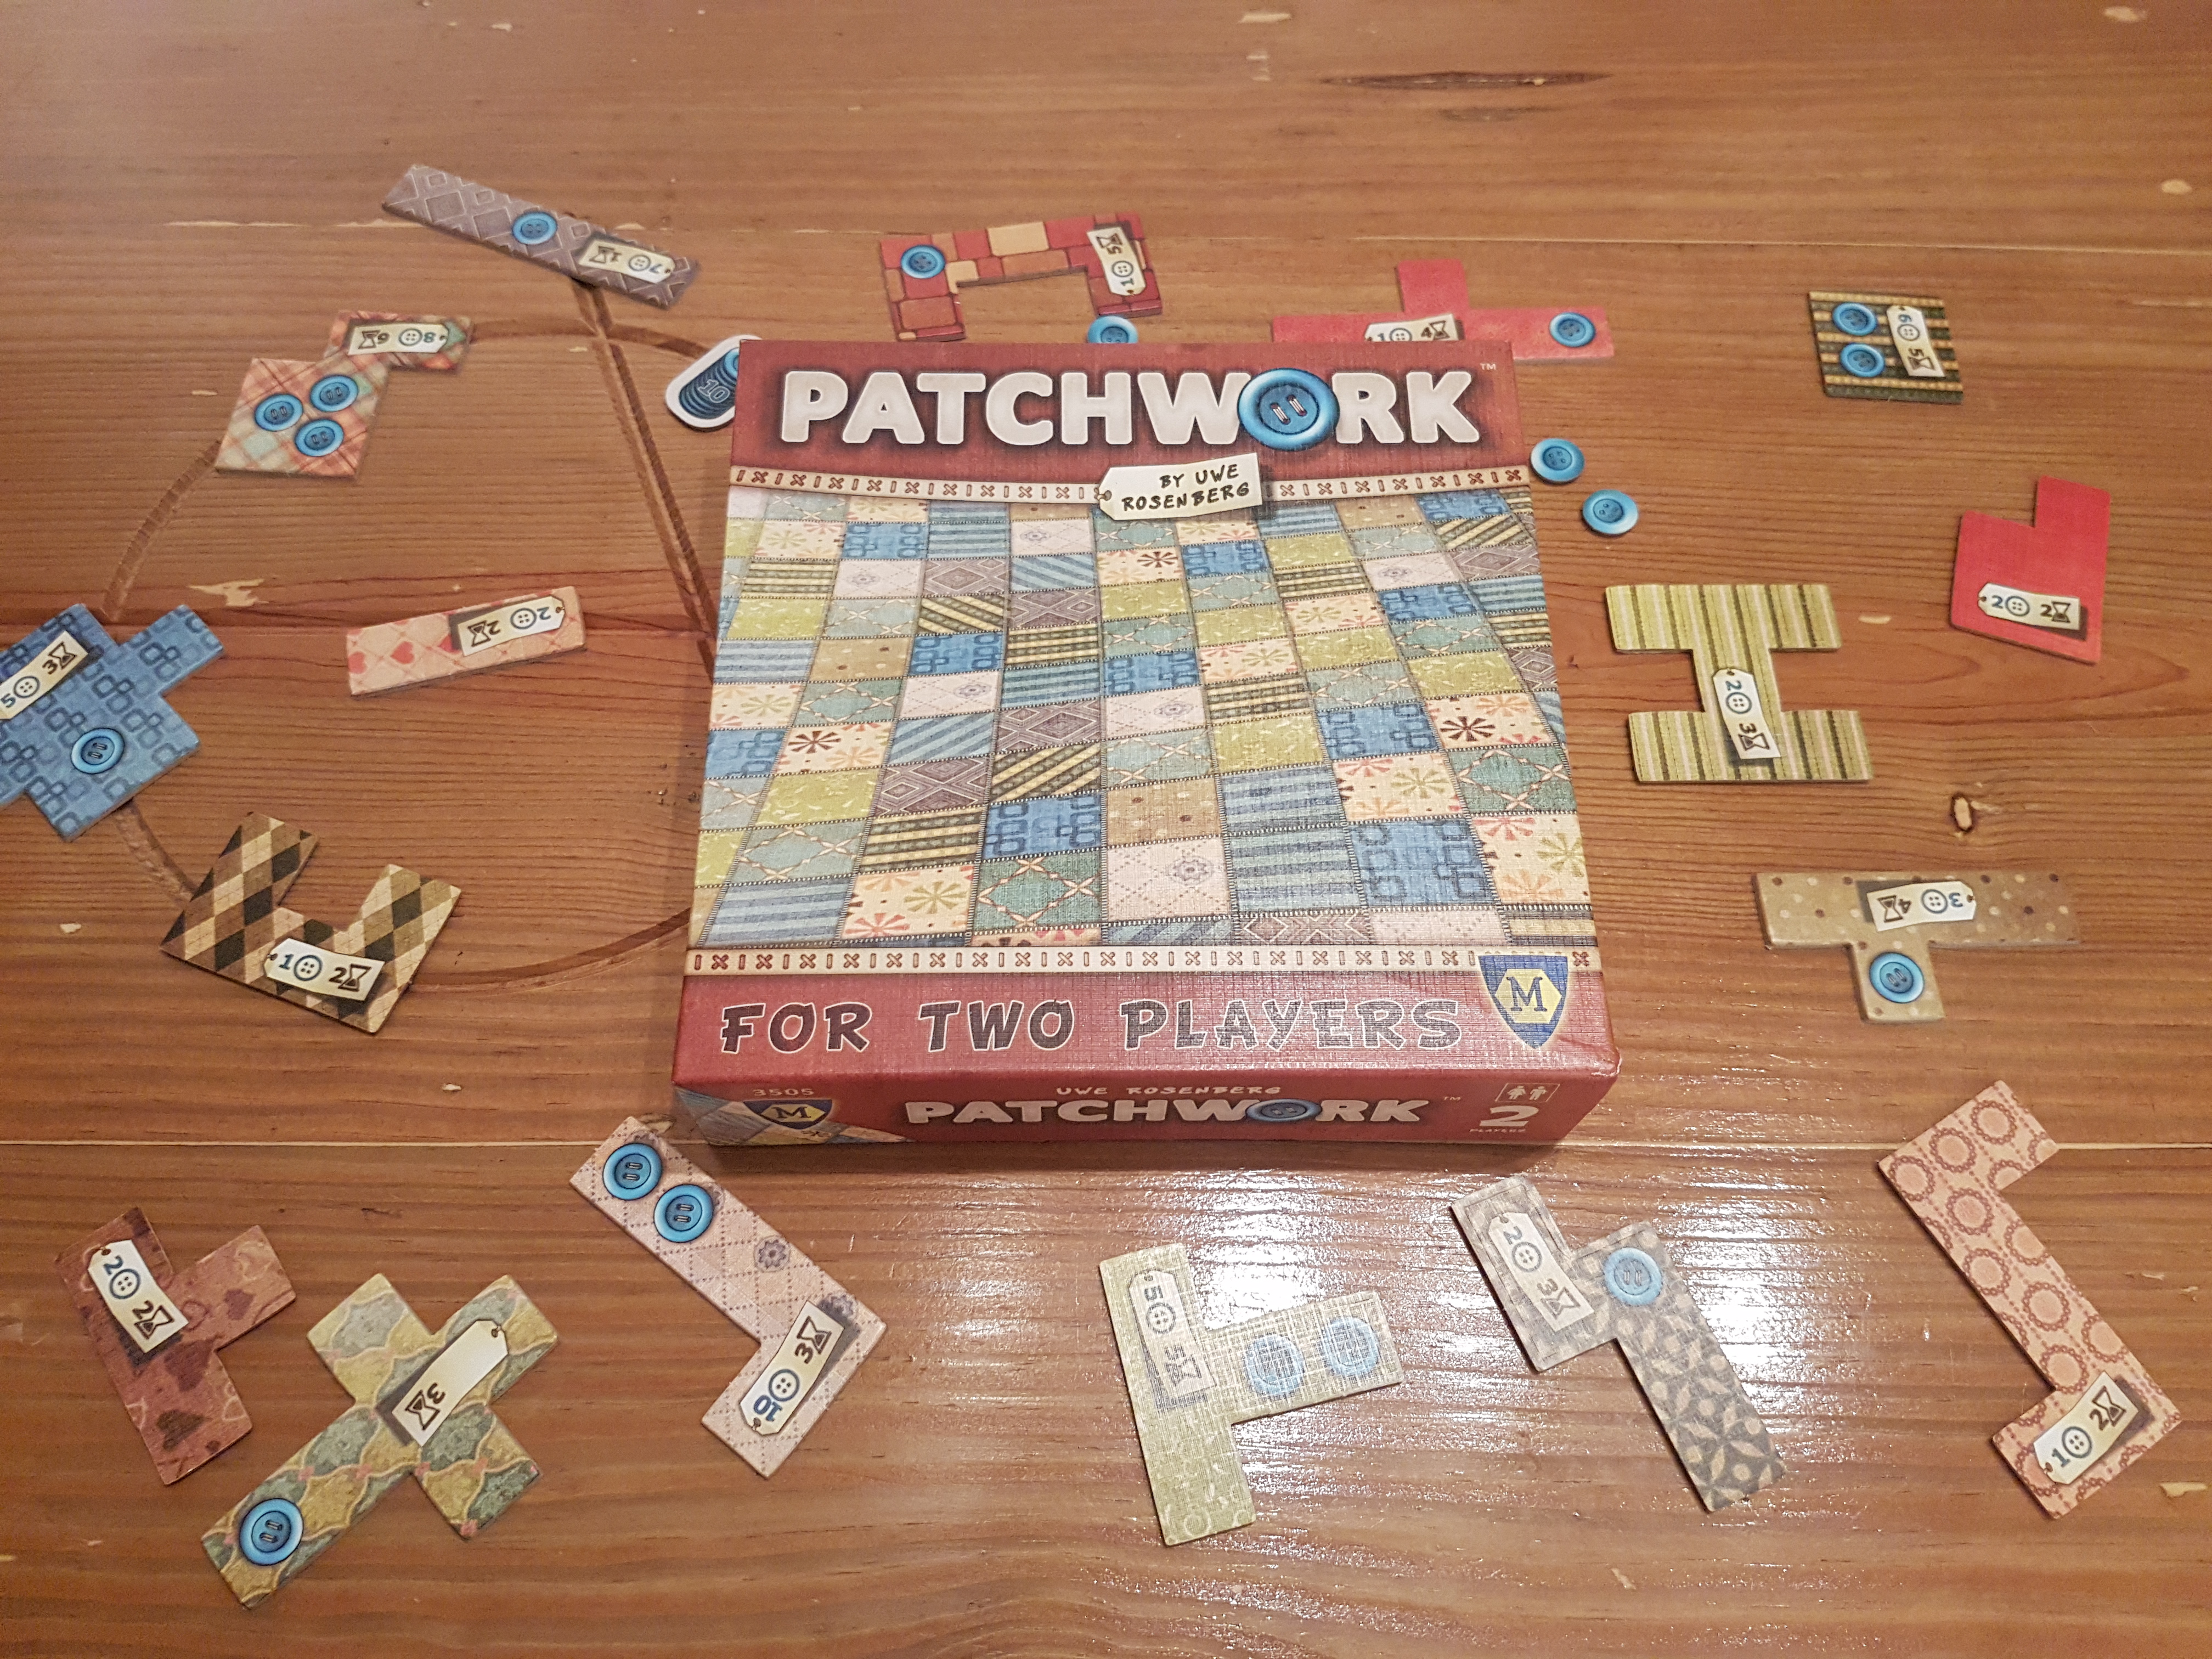 Patchwork Review – A Puzzle Layered With Strategy